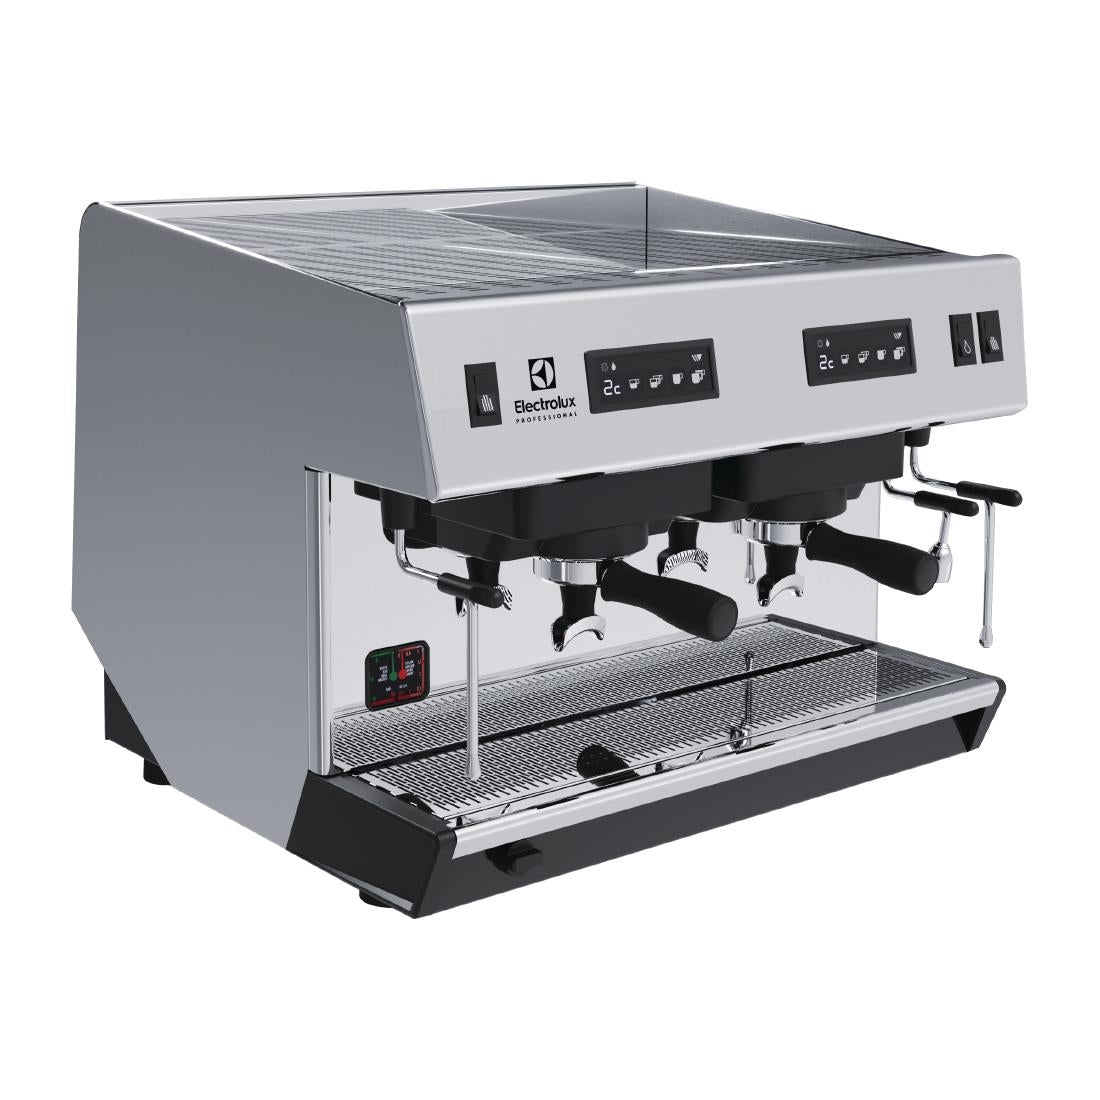 FT907 Electrolux Classic Espresso Machine 2 Group Head JD Catering Equipment Solutions Ltd